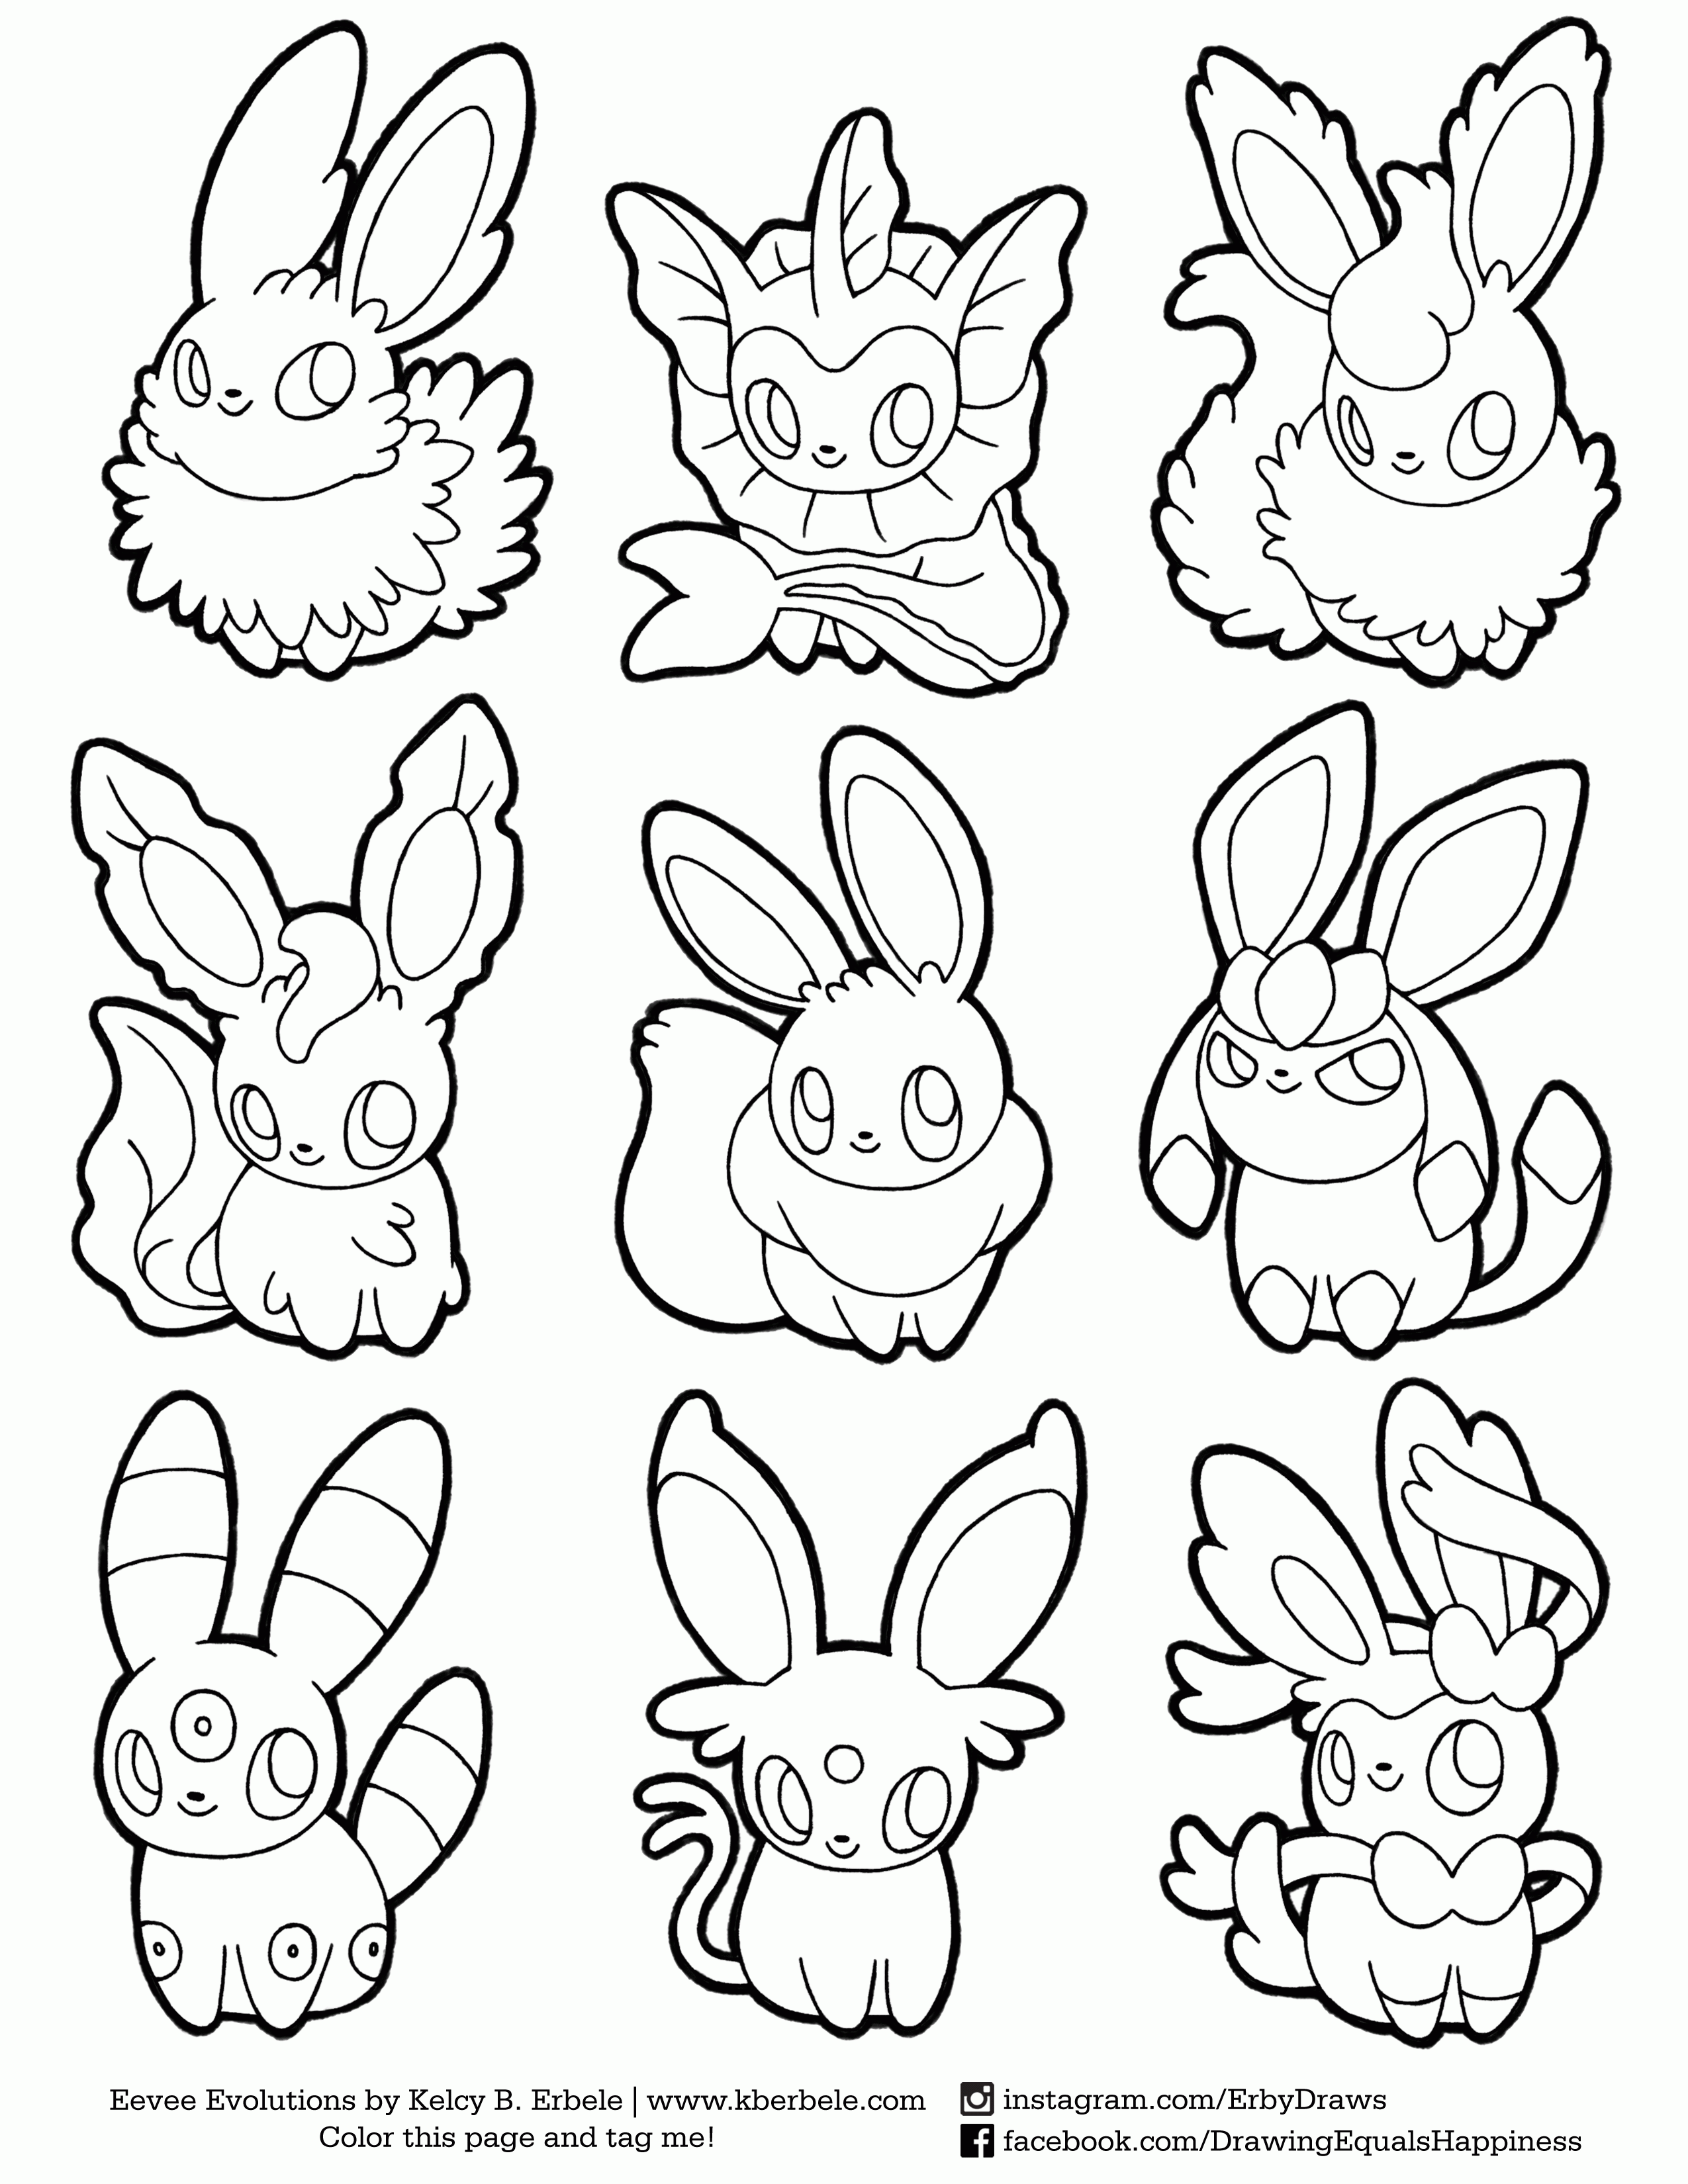 25+ Great Picture of Eevee Coloring Pages - albanysinsanity.com  Pikachu  coloring page, Pokemon coloring pages, Pokemon coloring